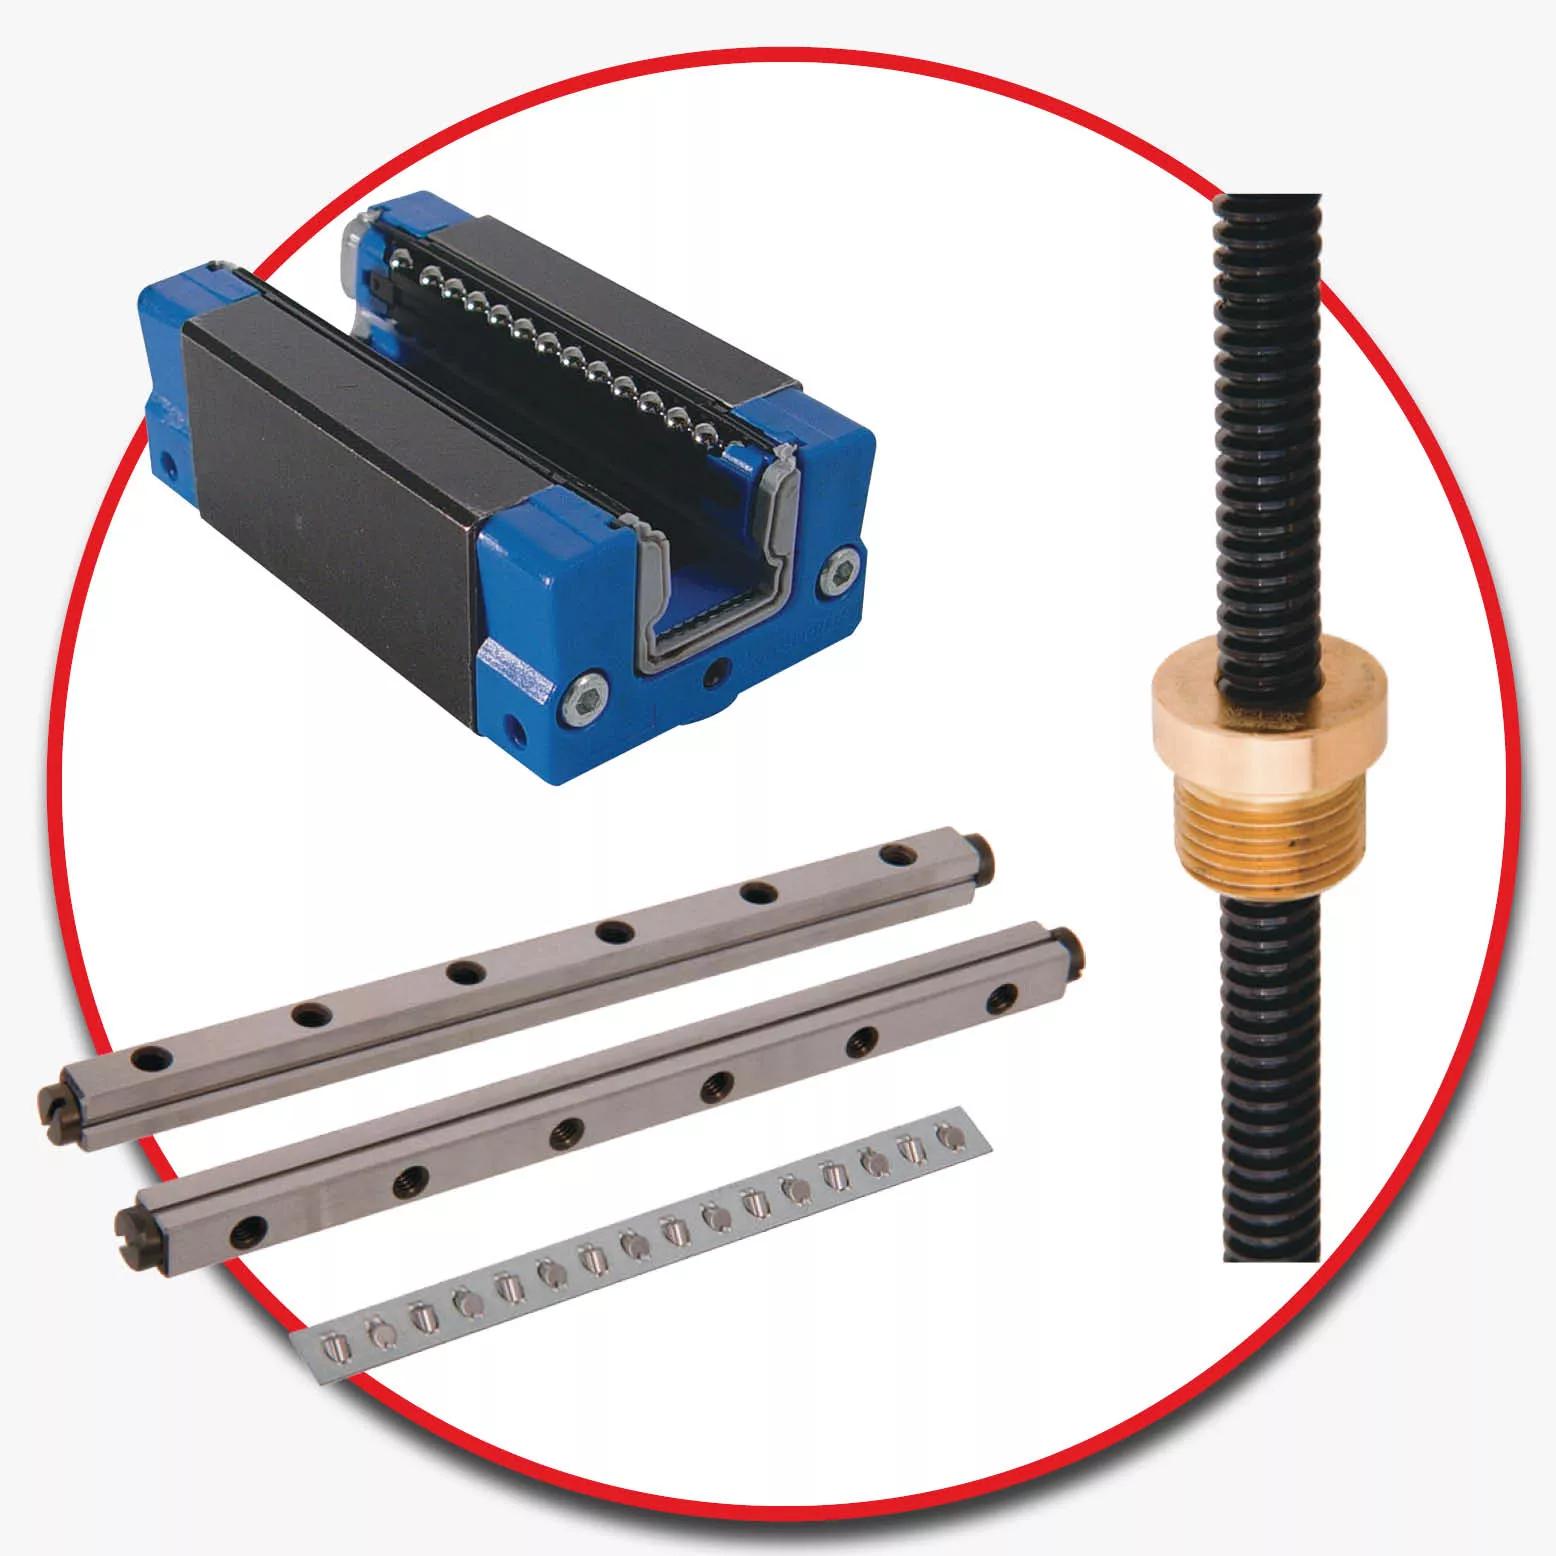 Linear Motion Components